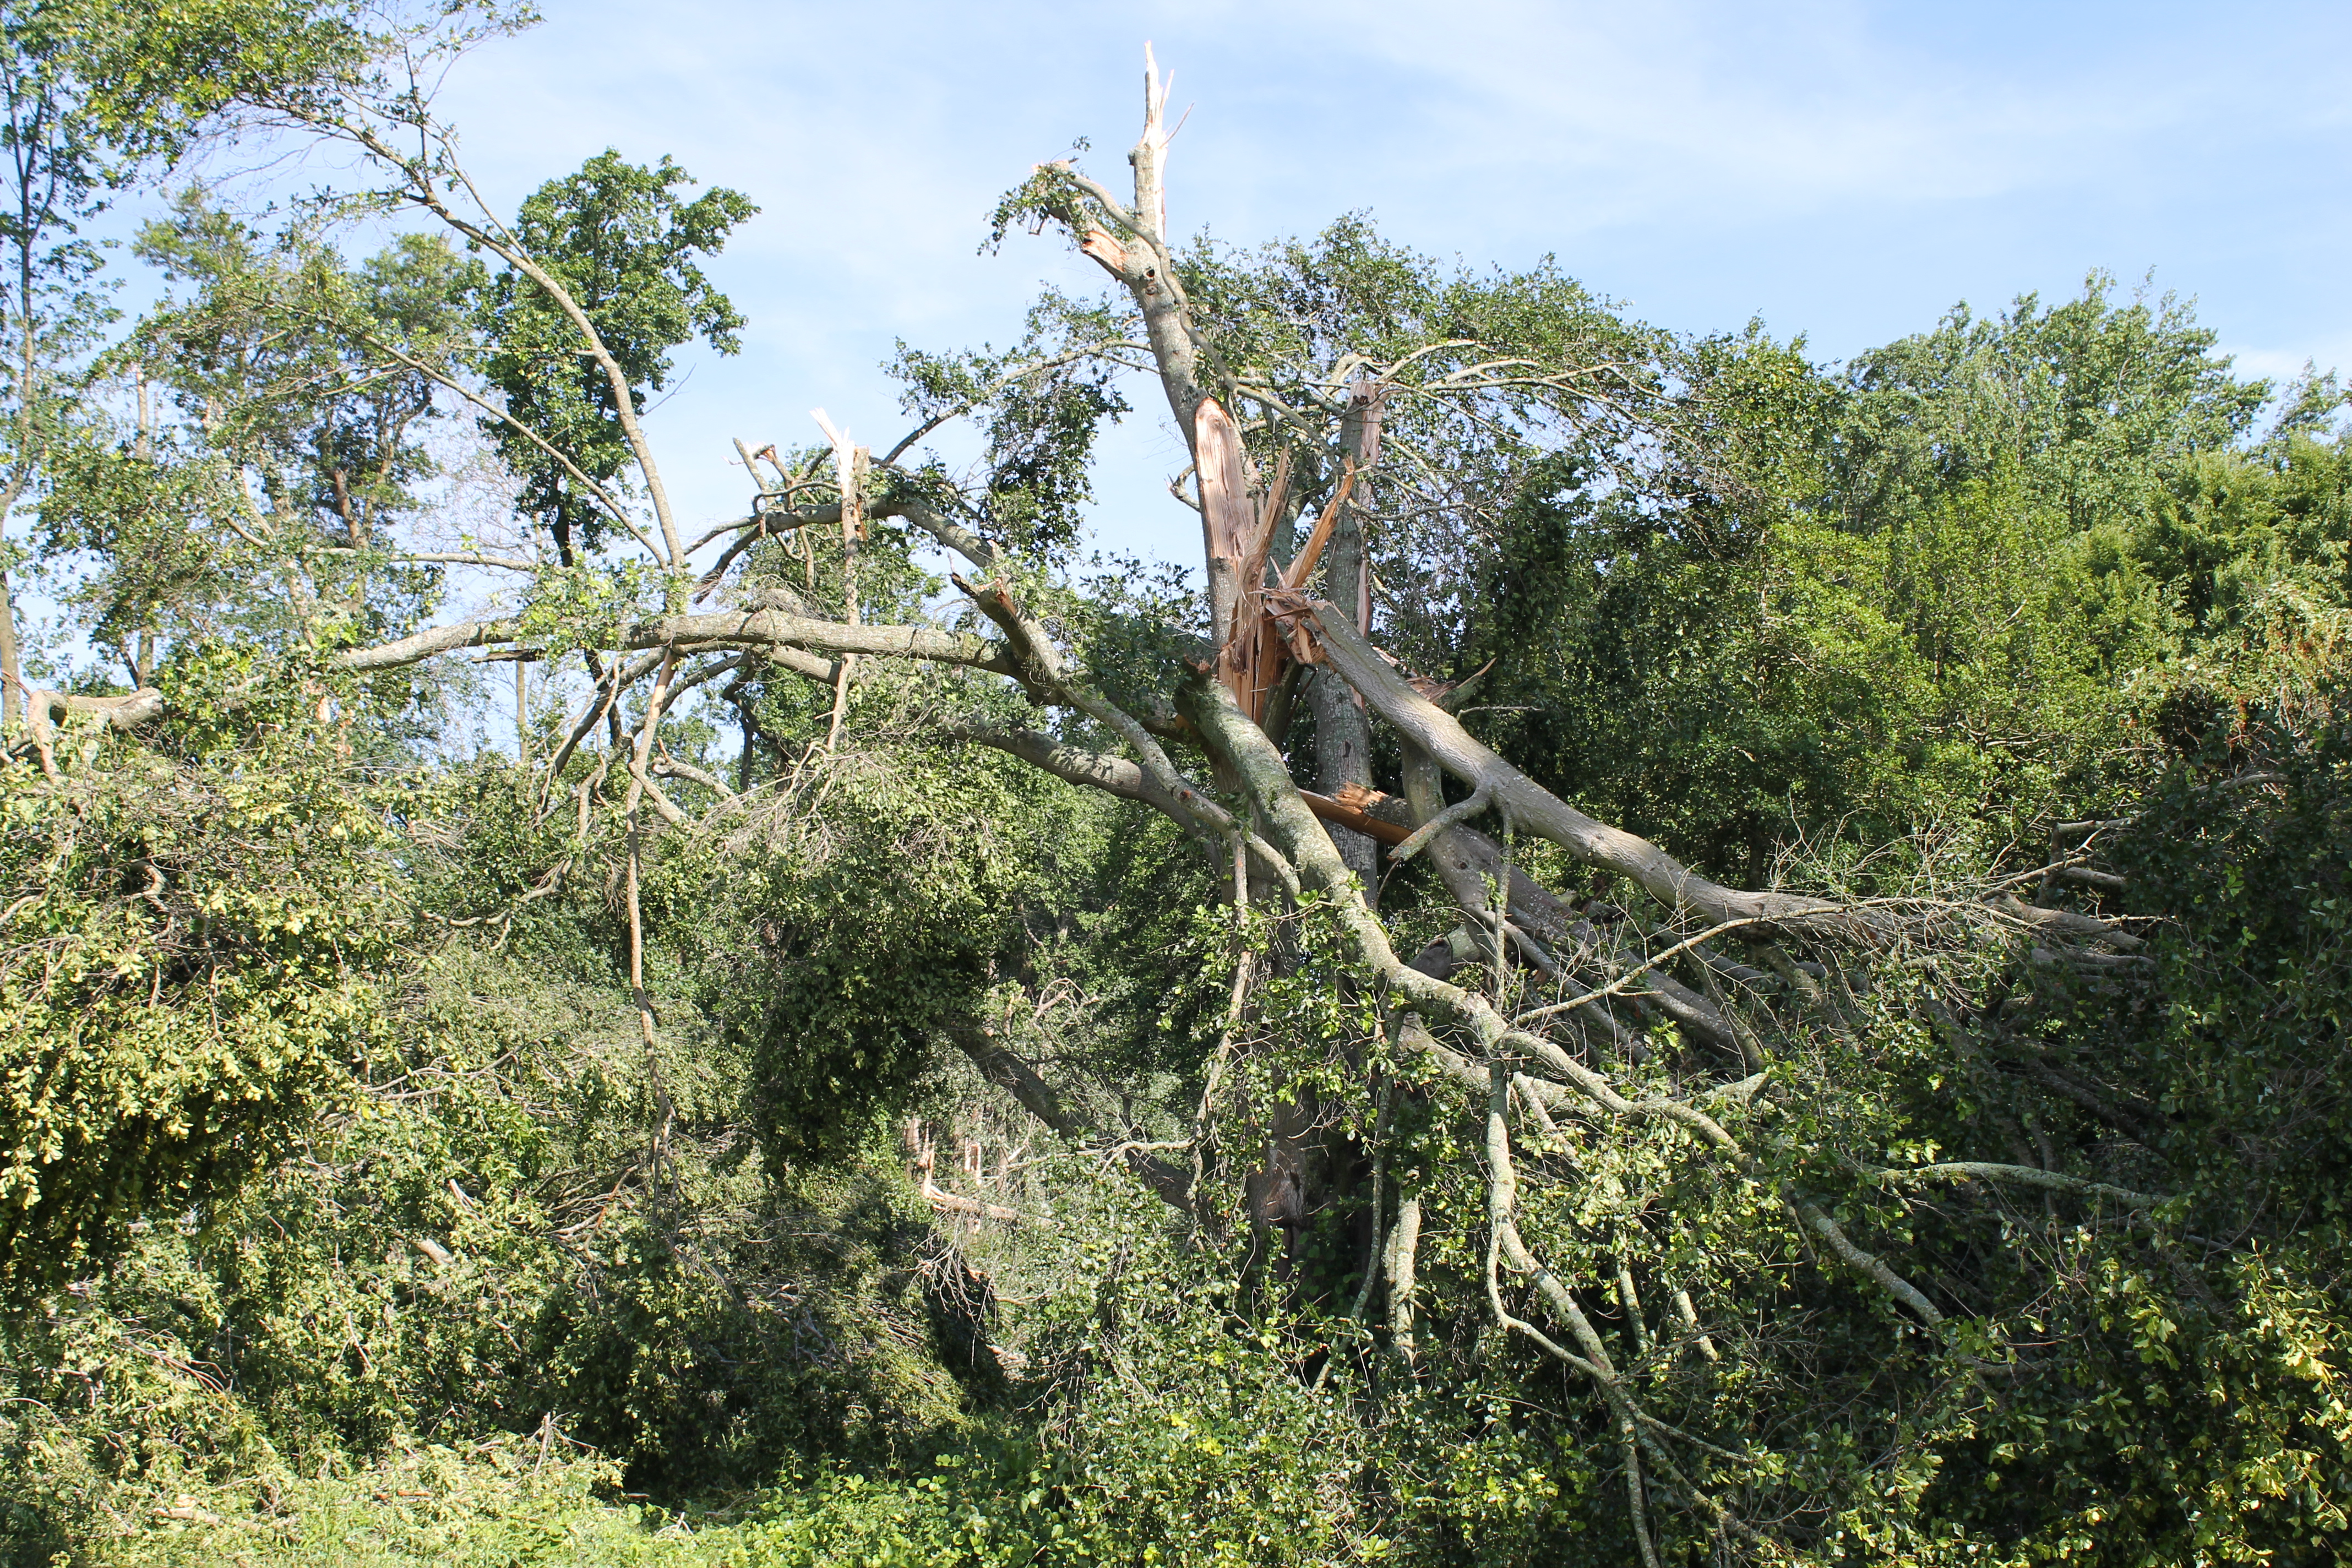 Many trees were snapped in half or uprooted completely.